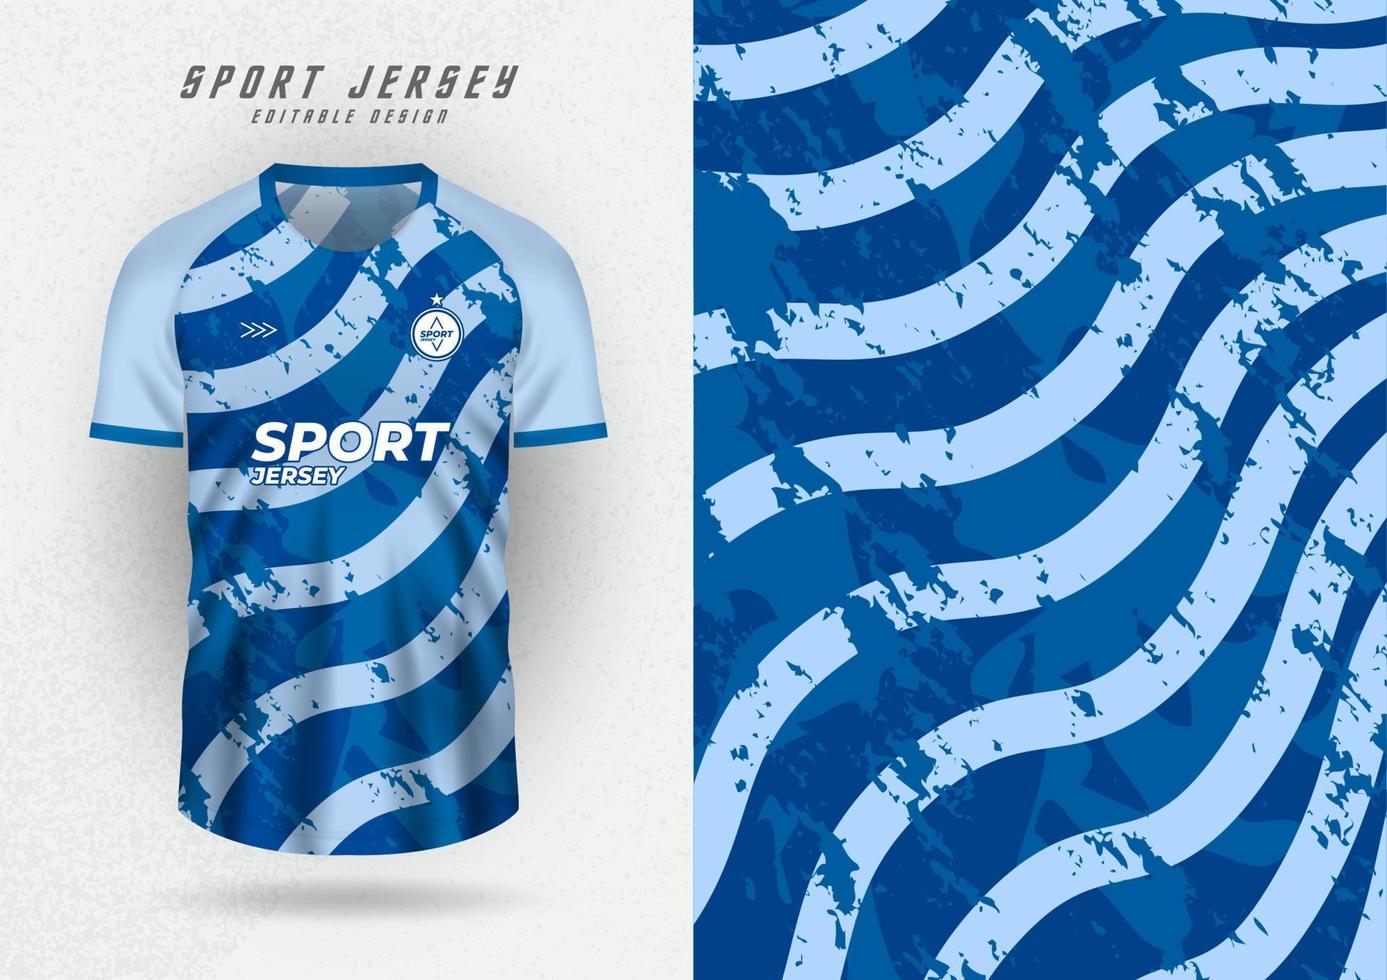 Background mockup for sports jersey, jersey, running shirt, wave pattern. vector